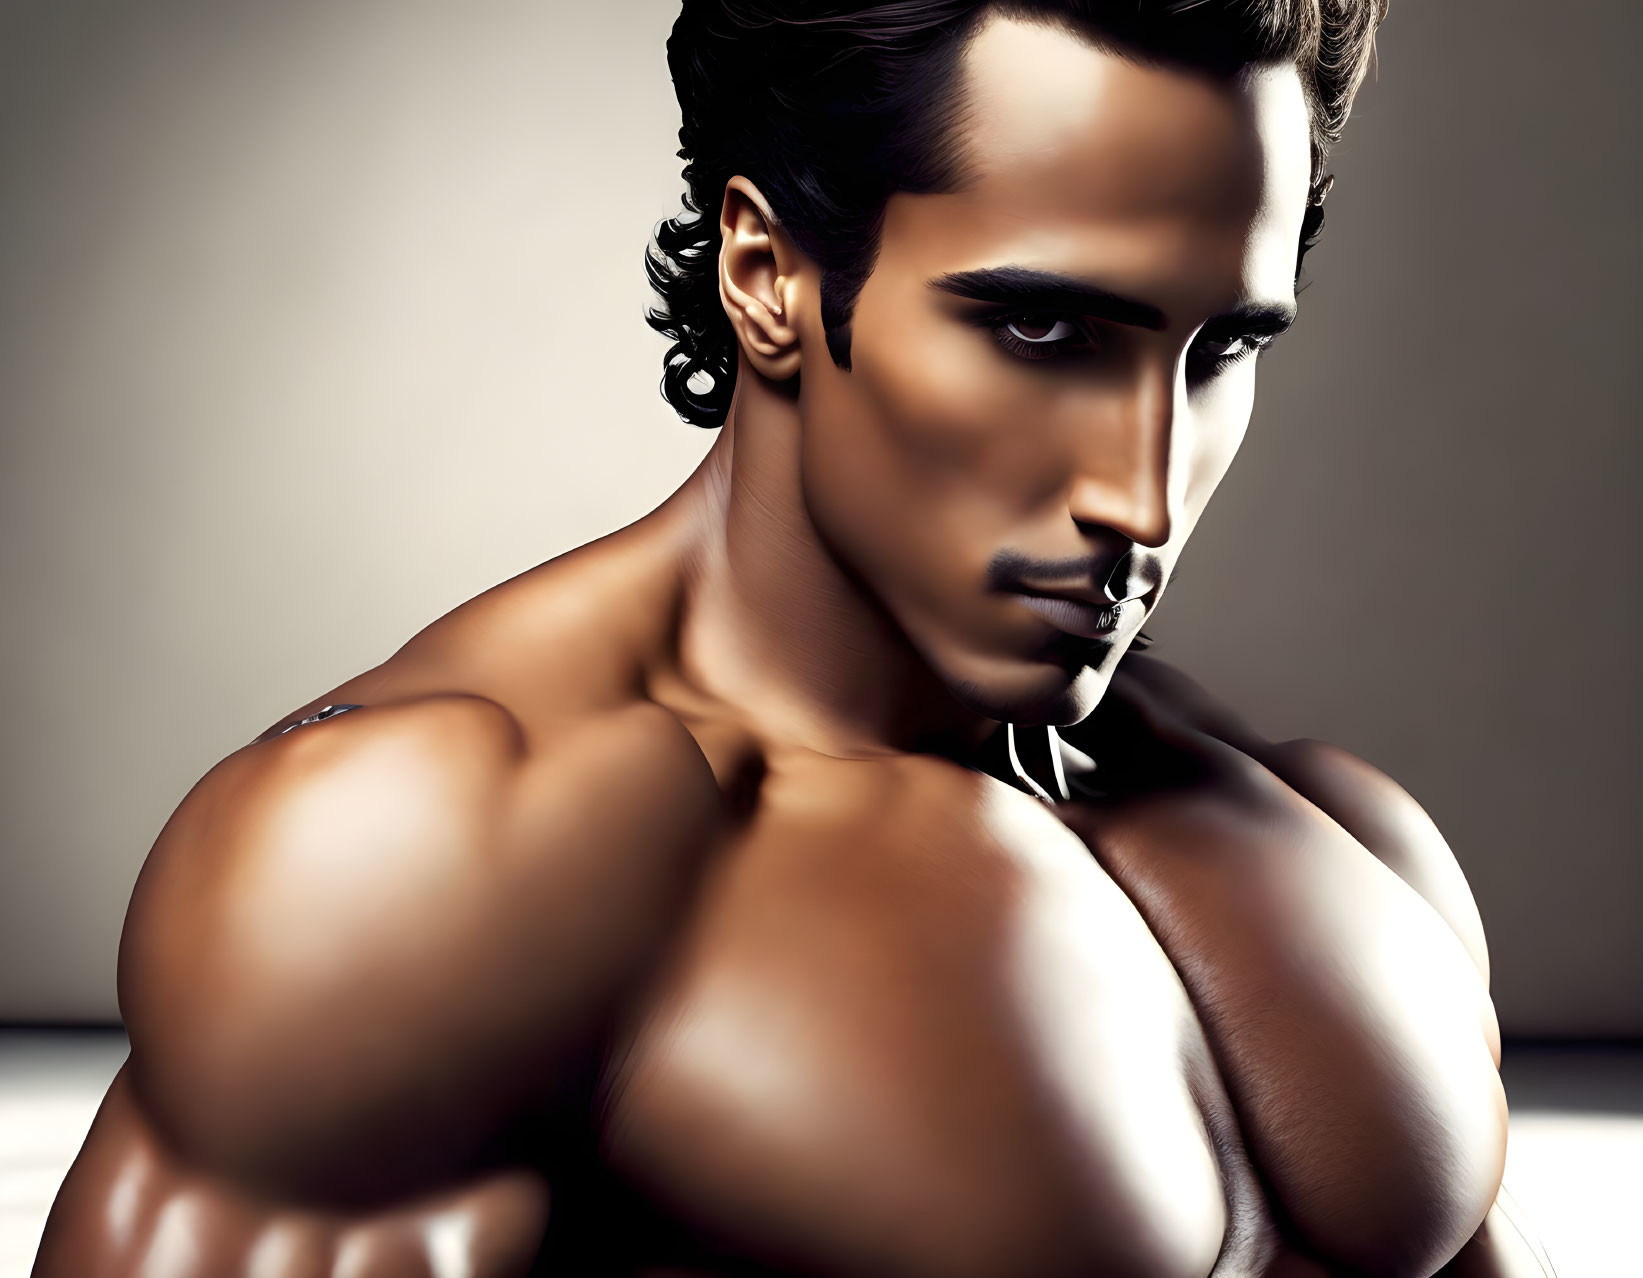 Muscular man digital portrait with contemplative expression